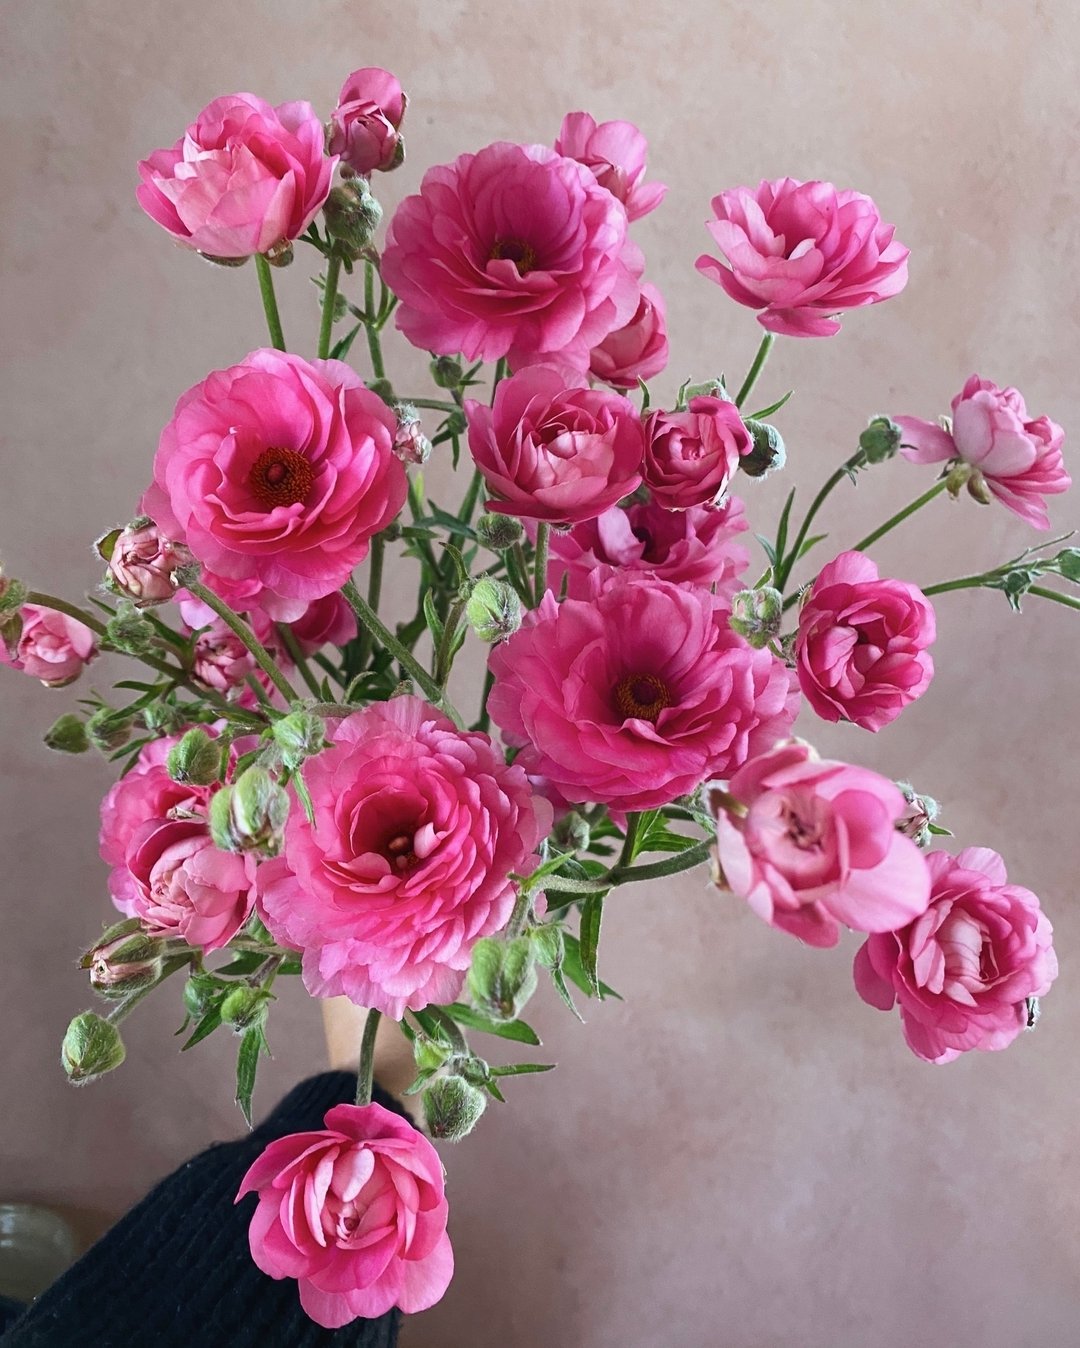 Ranunculus Moderna 819 giving the most. We feel kind of bad because we wrote her off pretty quickly as something too bright/bold/offensive. But we were surprised by her rose-like shape, her leaning-blue-pink and just how many flowers were on one stem